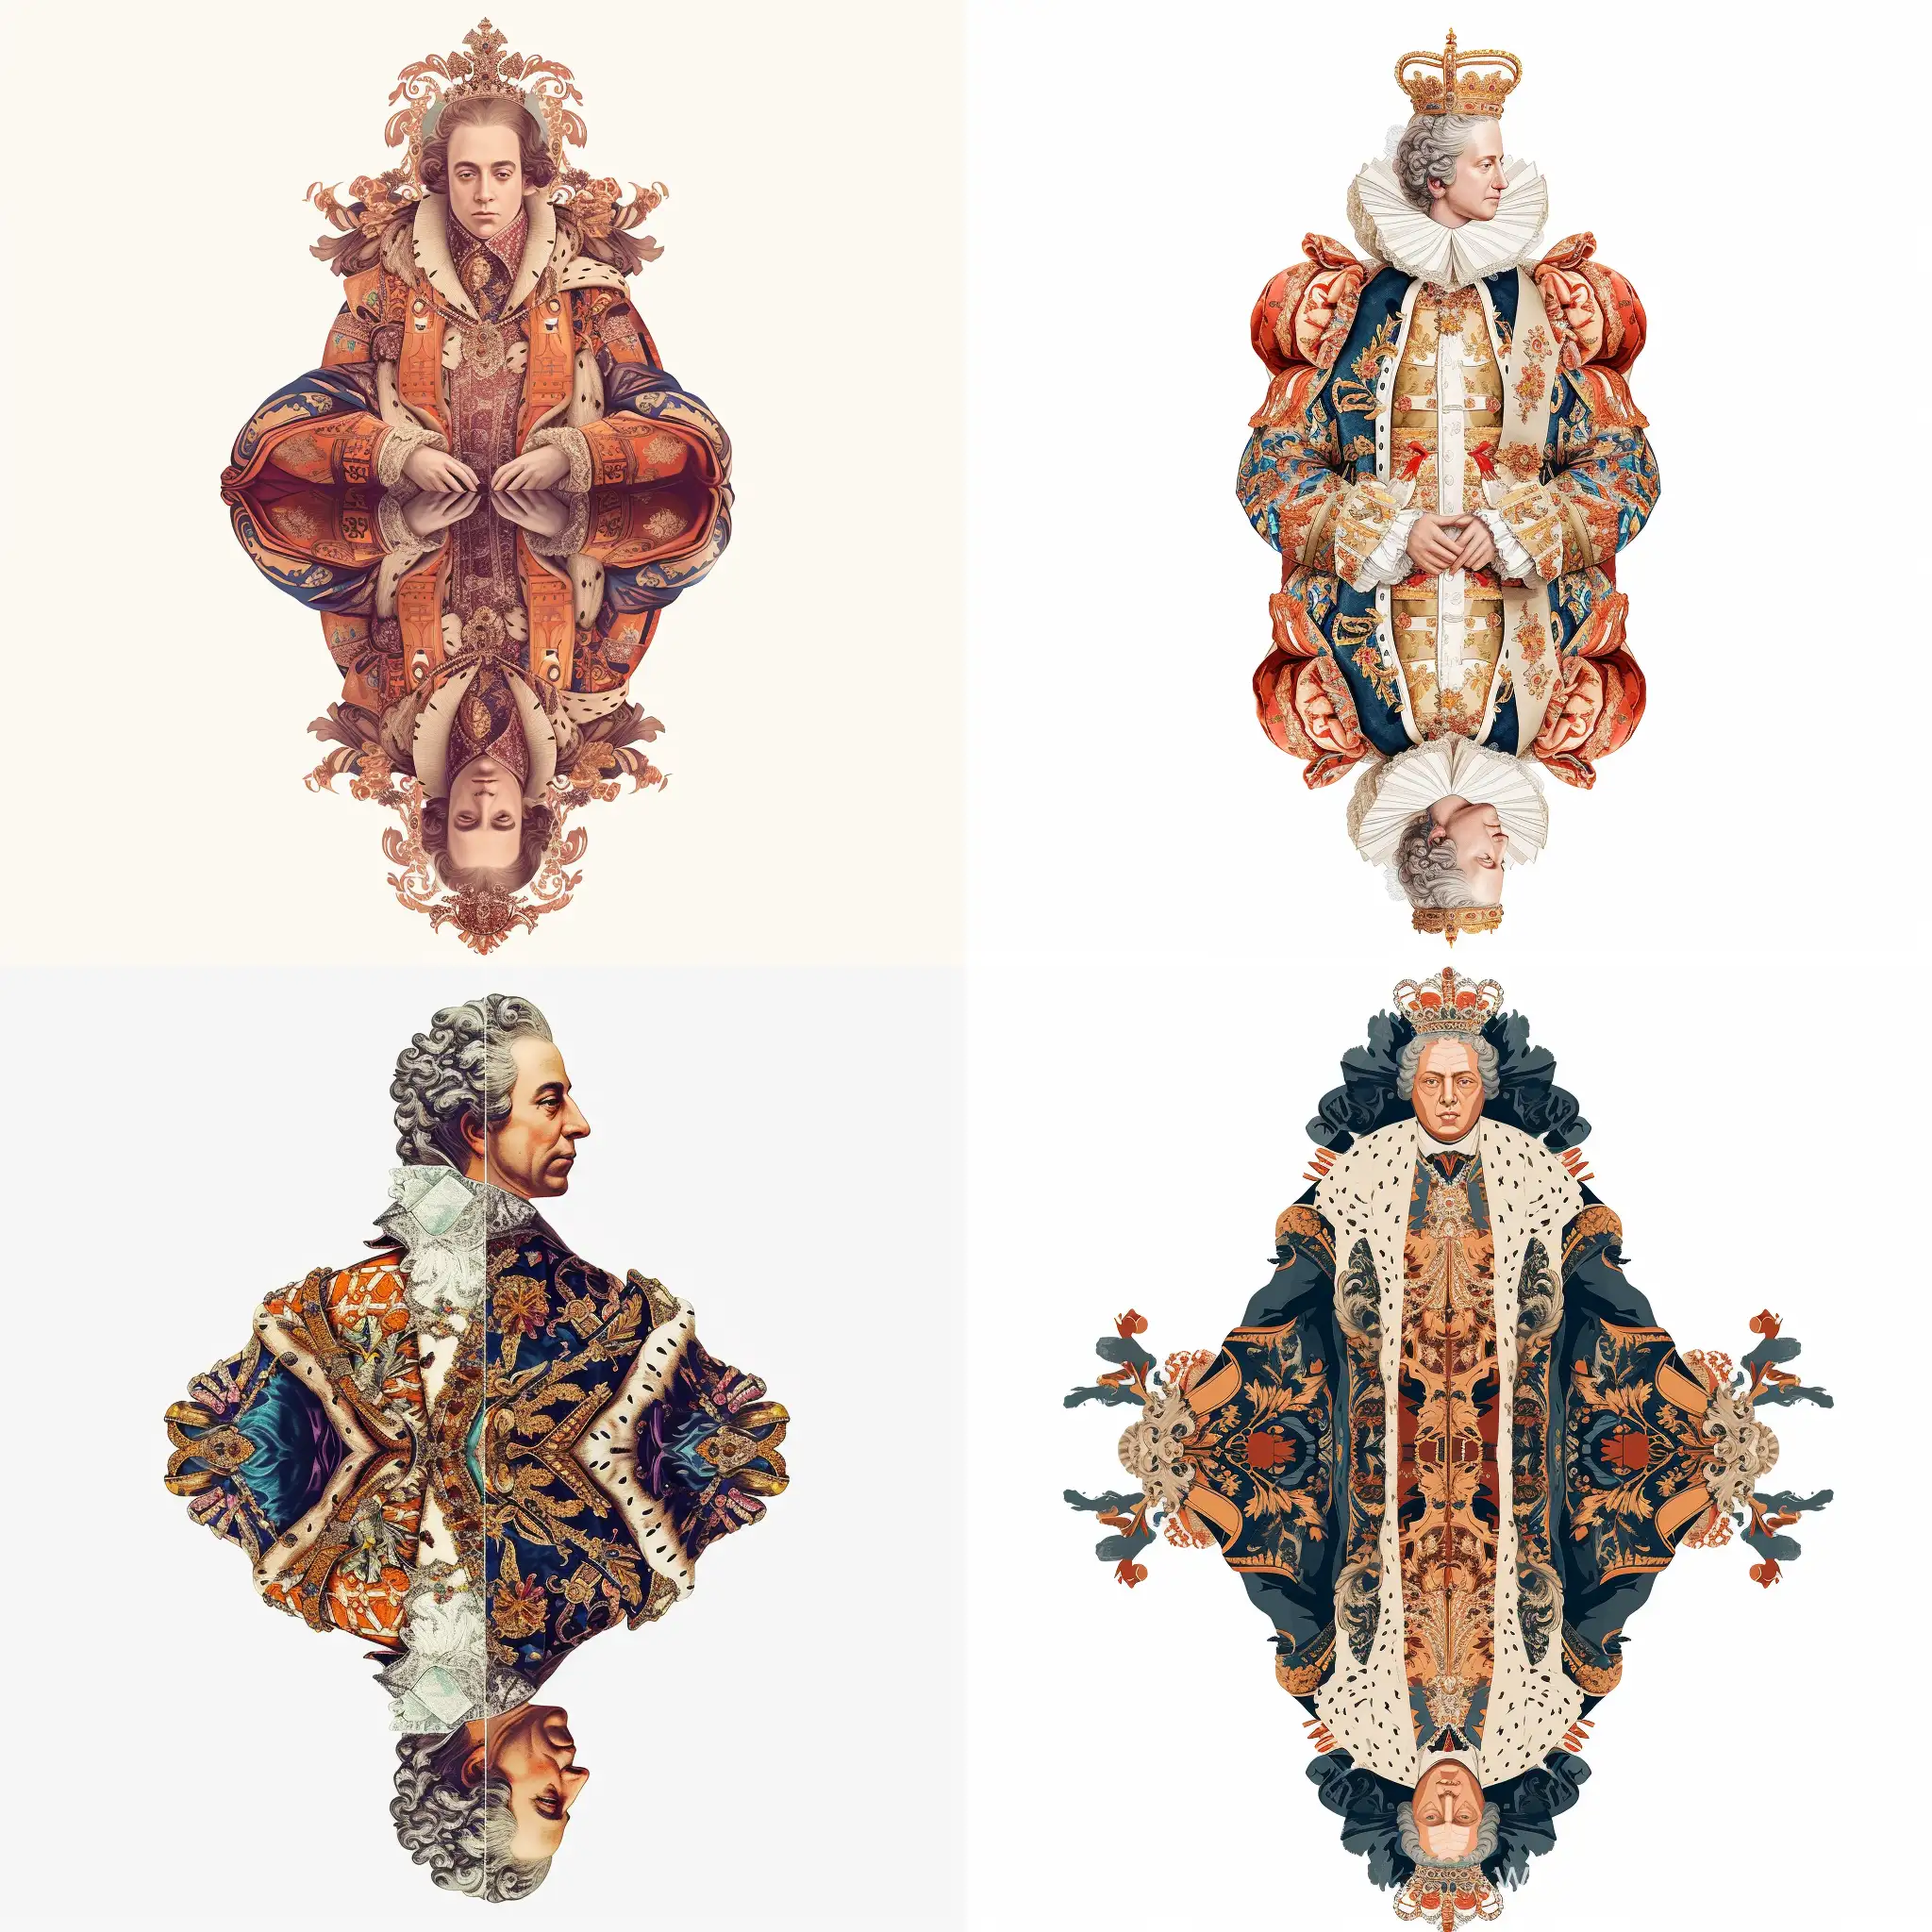 Ornamental portrait of the King of France in rich clothes, reflected vertically,on a white background, flat illustration, watercolor style by Victor Ngai